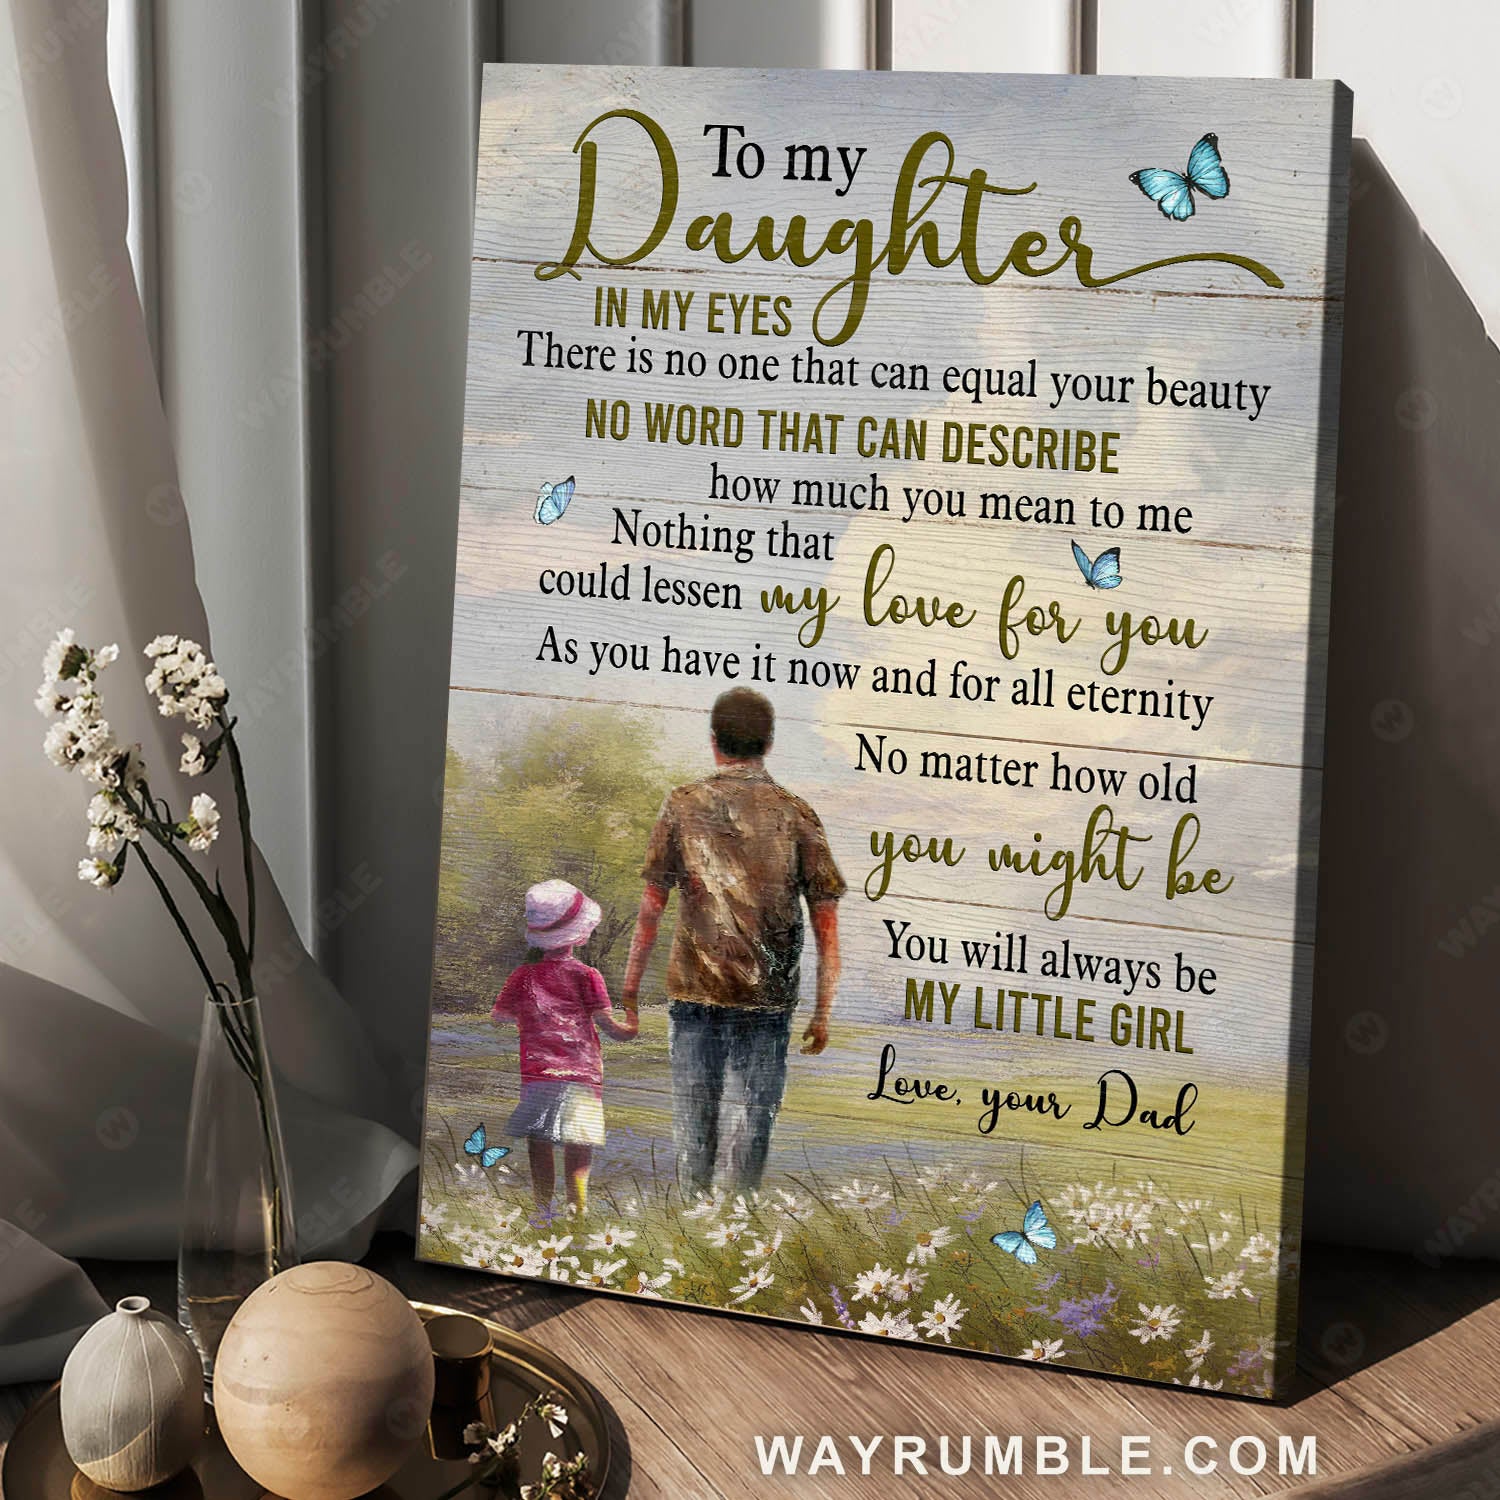 Dad to daughter, Daisy flower, Walking drawing, No word that can describe - Family Portrait Canvas Prints, Wall Art